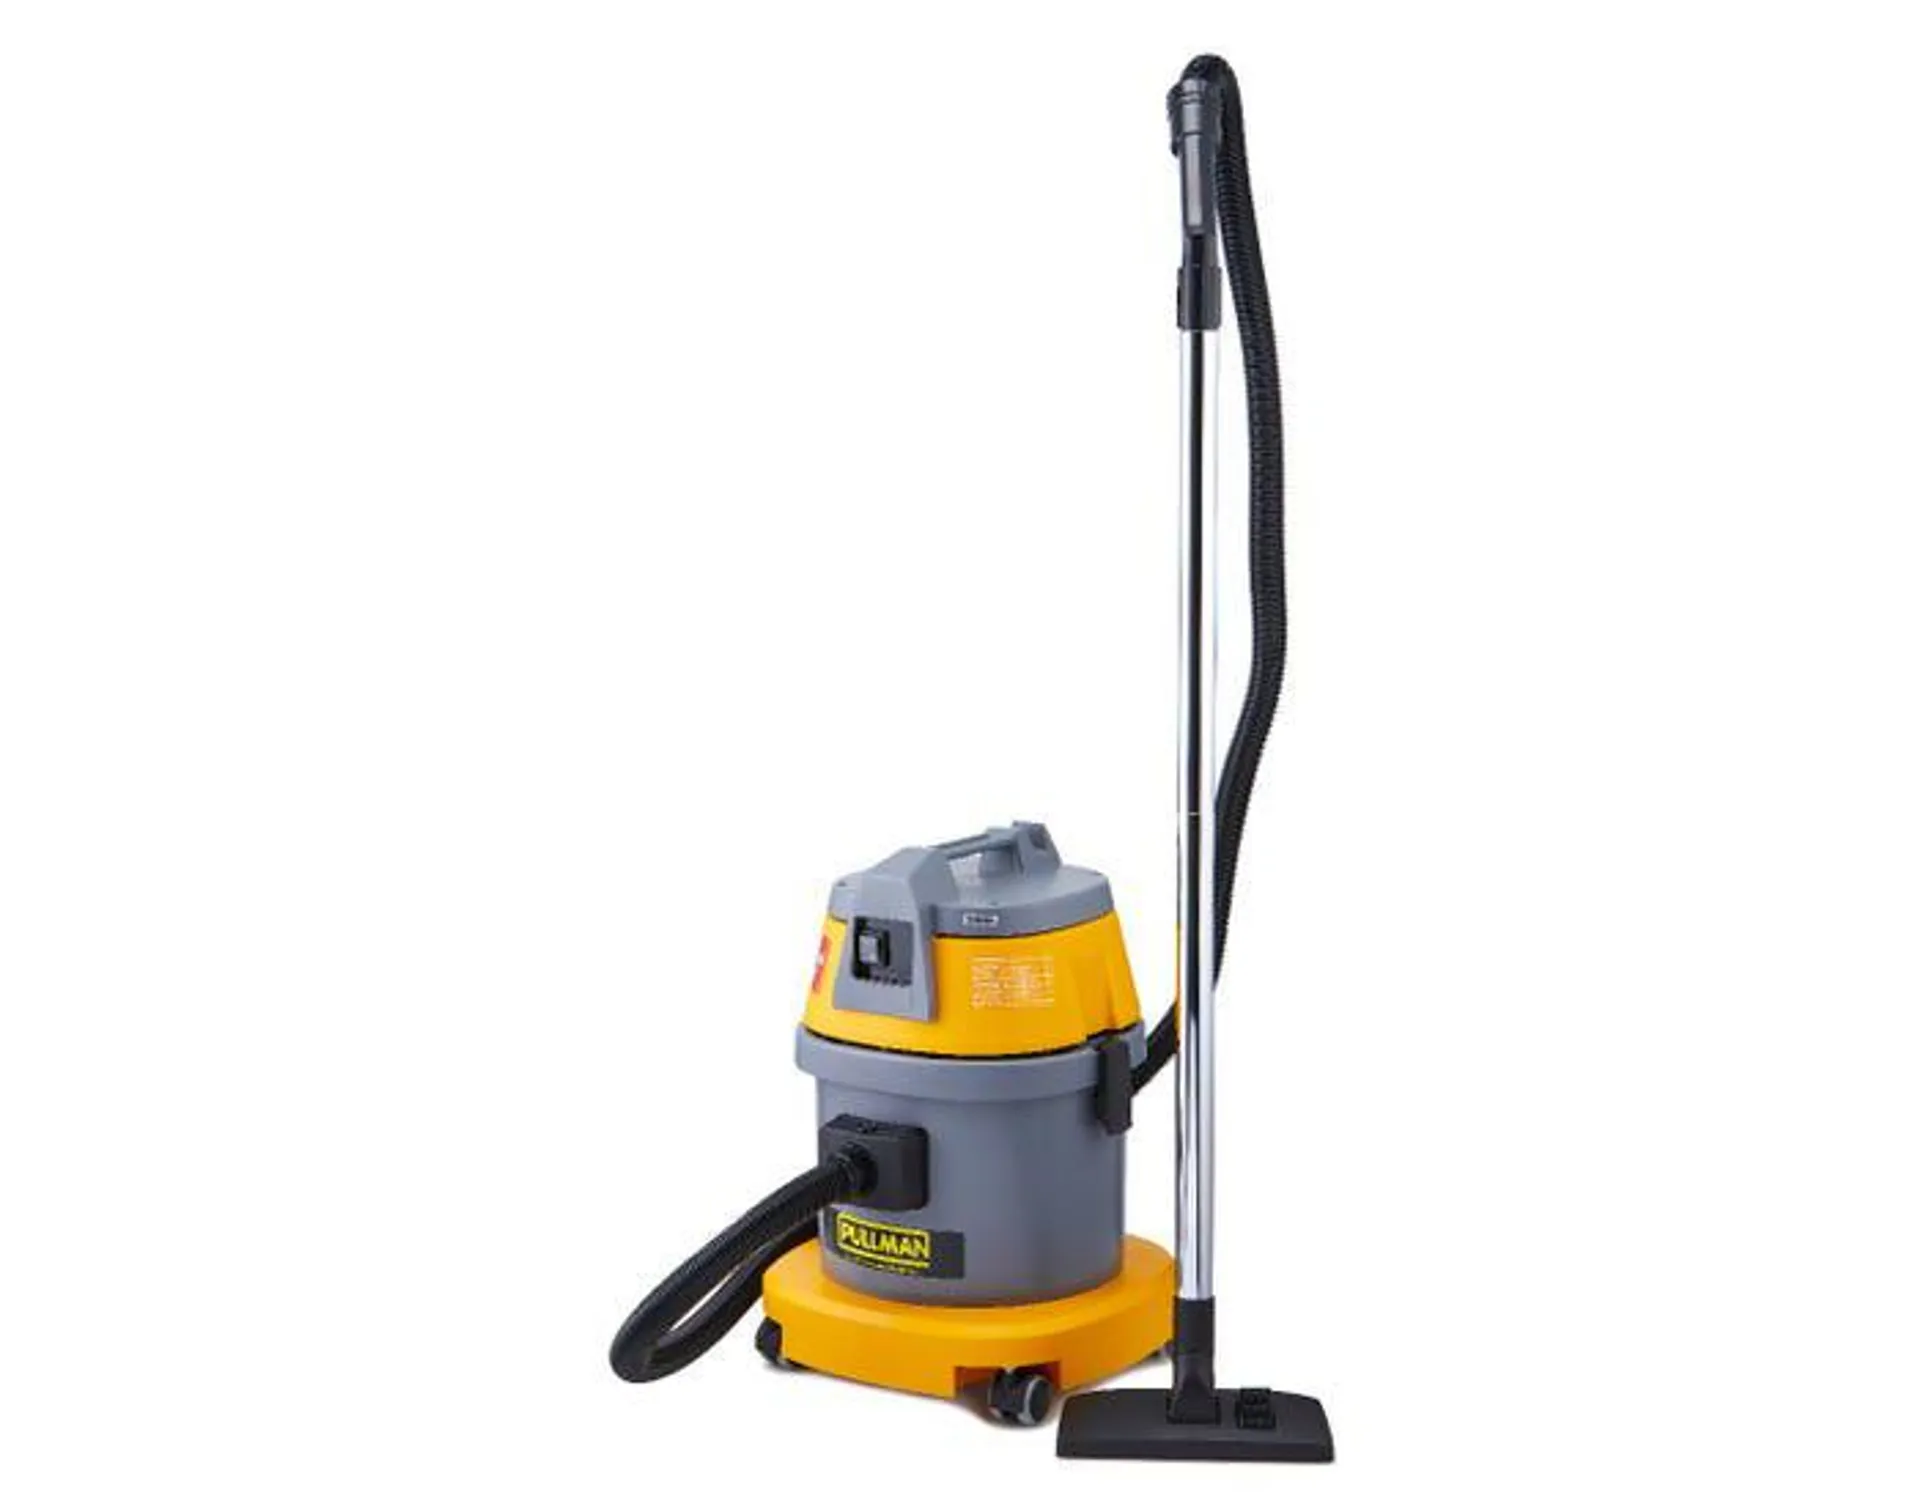 Pullman AS10 Wet & Dry Commercial Vacuum Cleaner